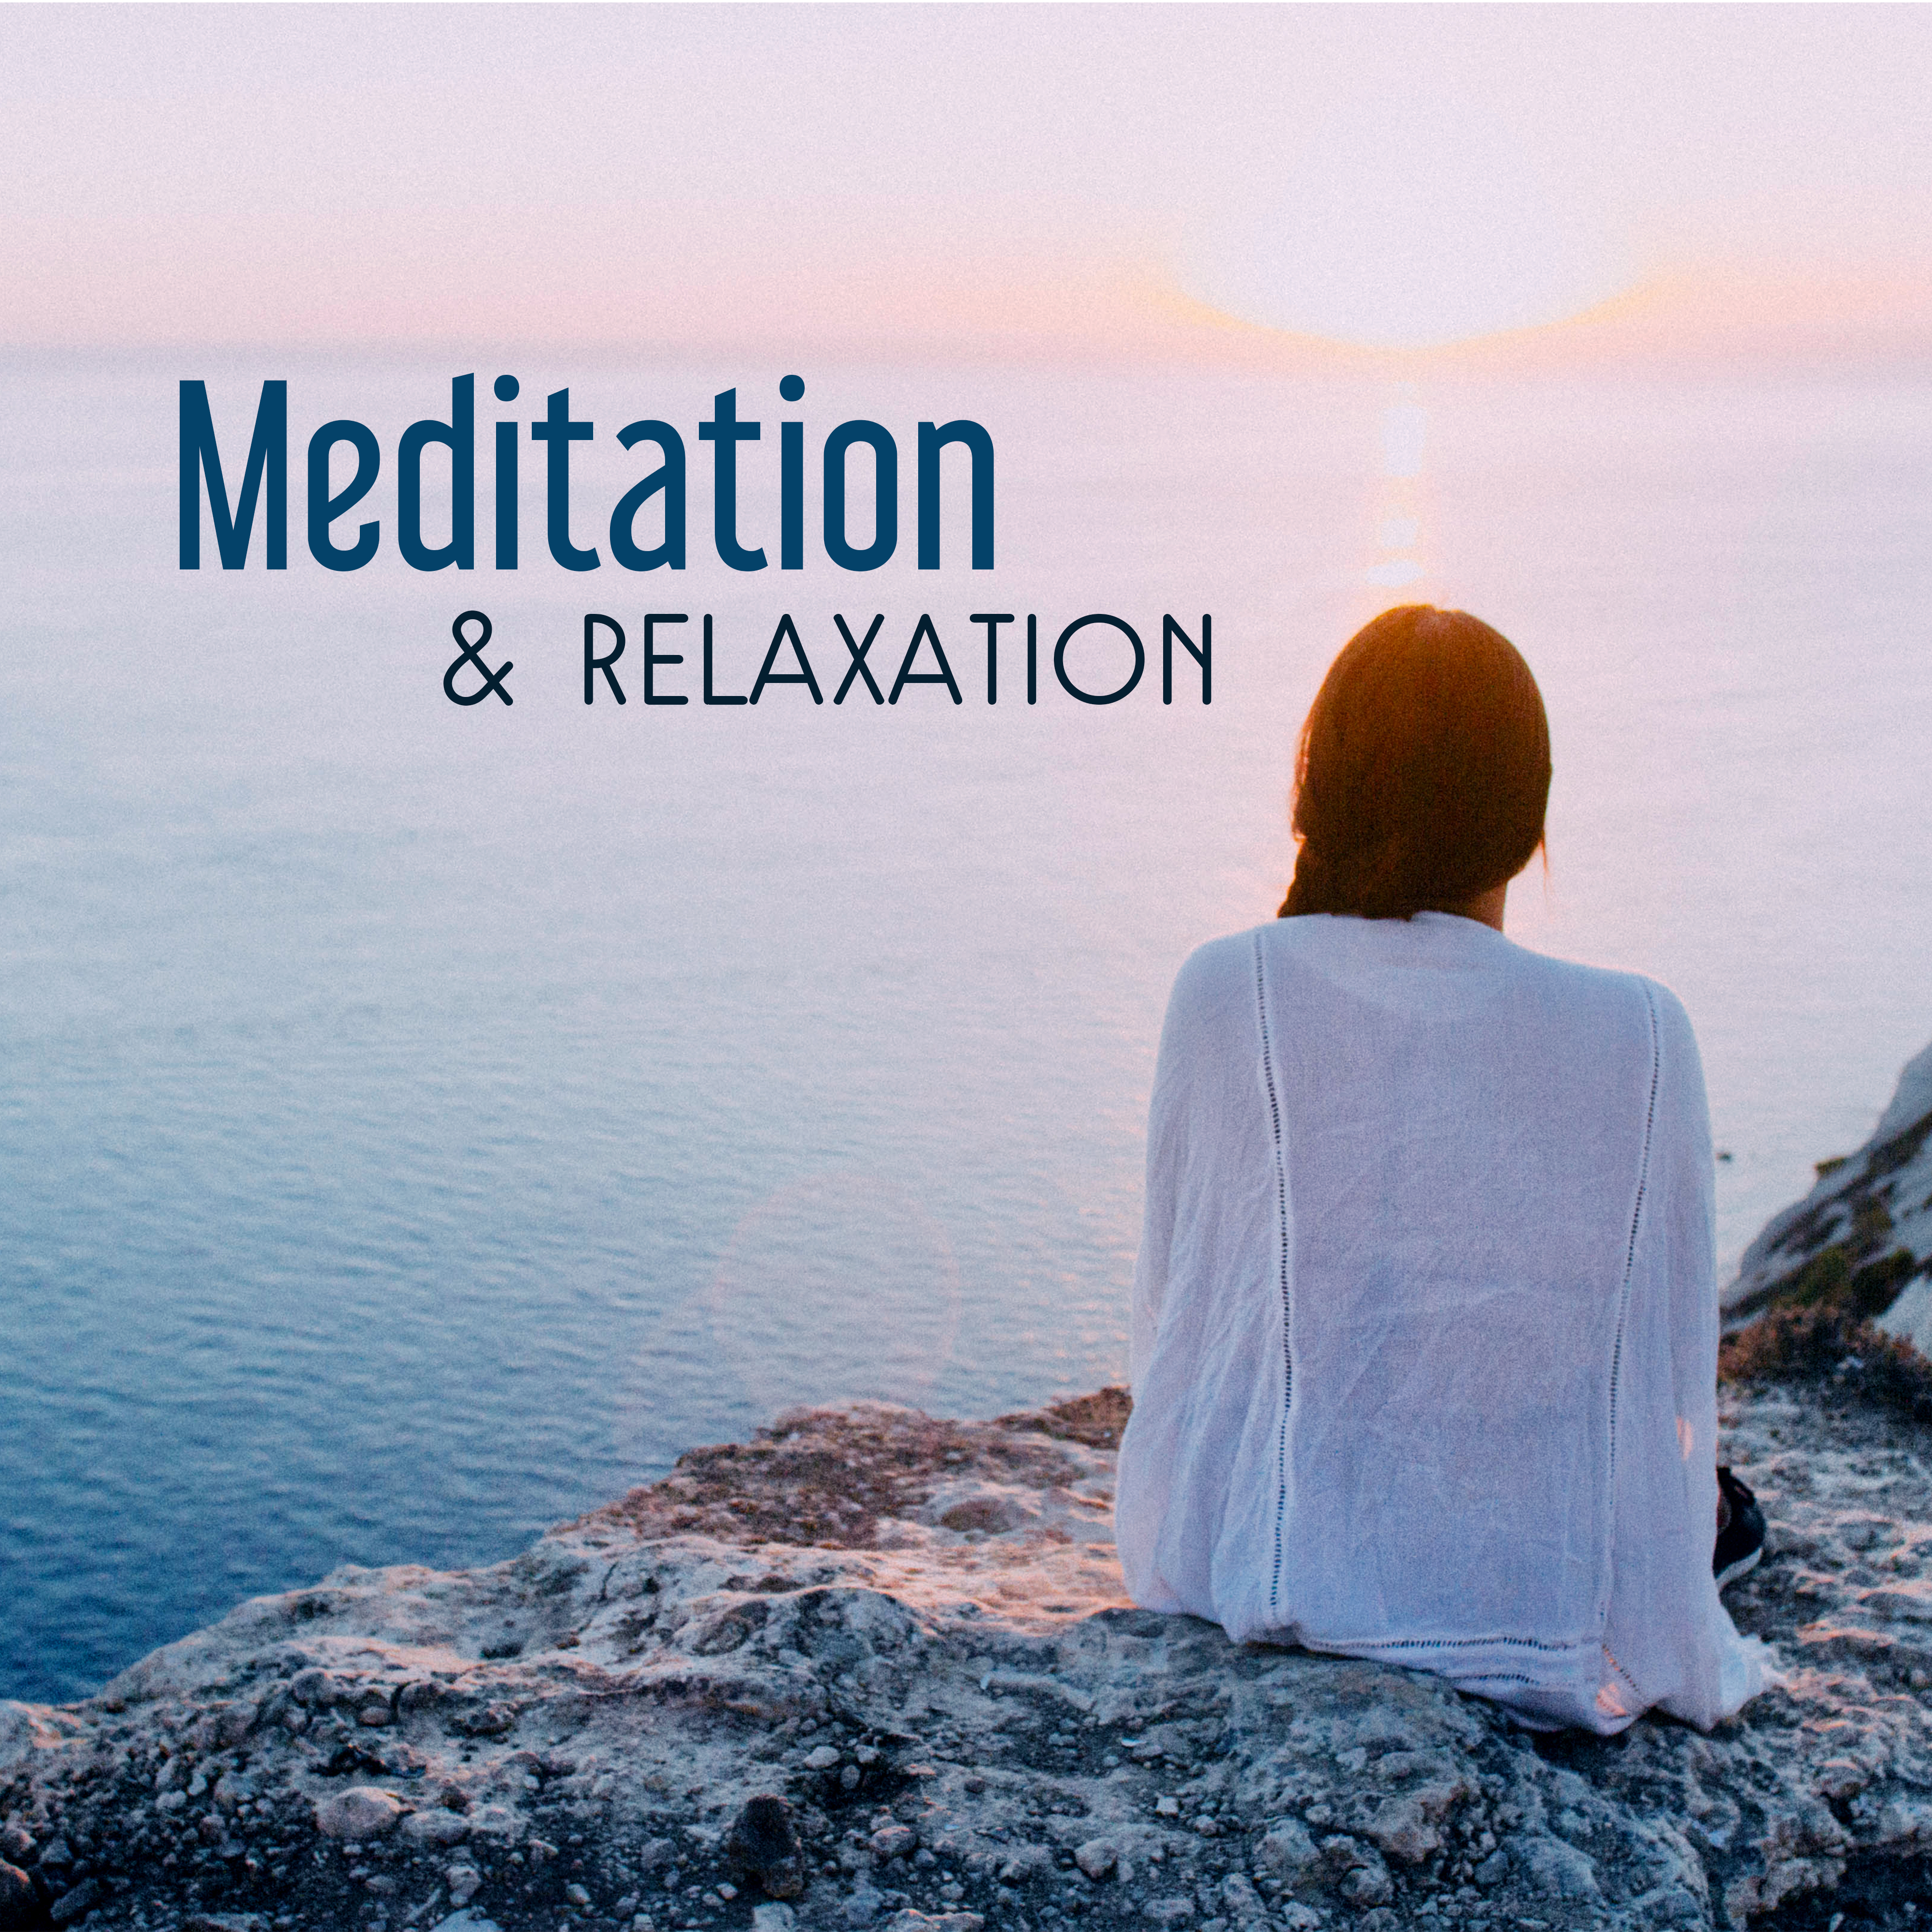 Meditation & Relaxation – Reiki Music, Zen, Deep Relief, Nature Sounds for Yoga, Meditation, Train Your Mind, Harmony & Focus